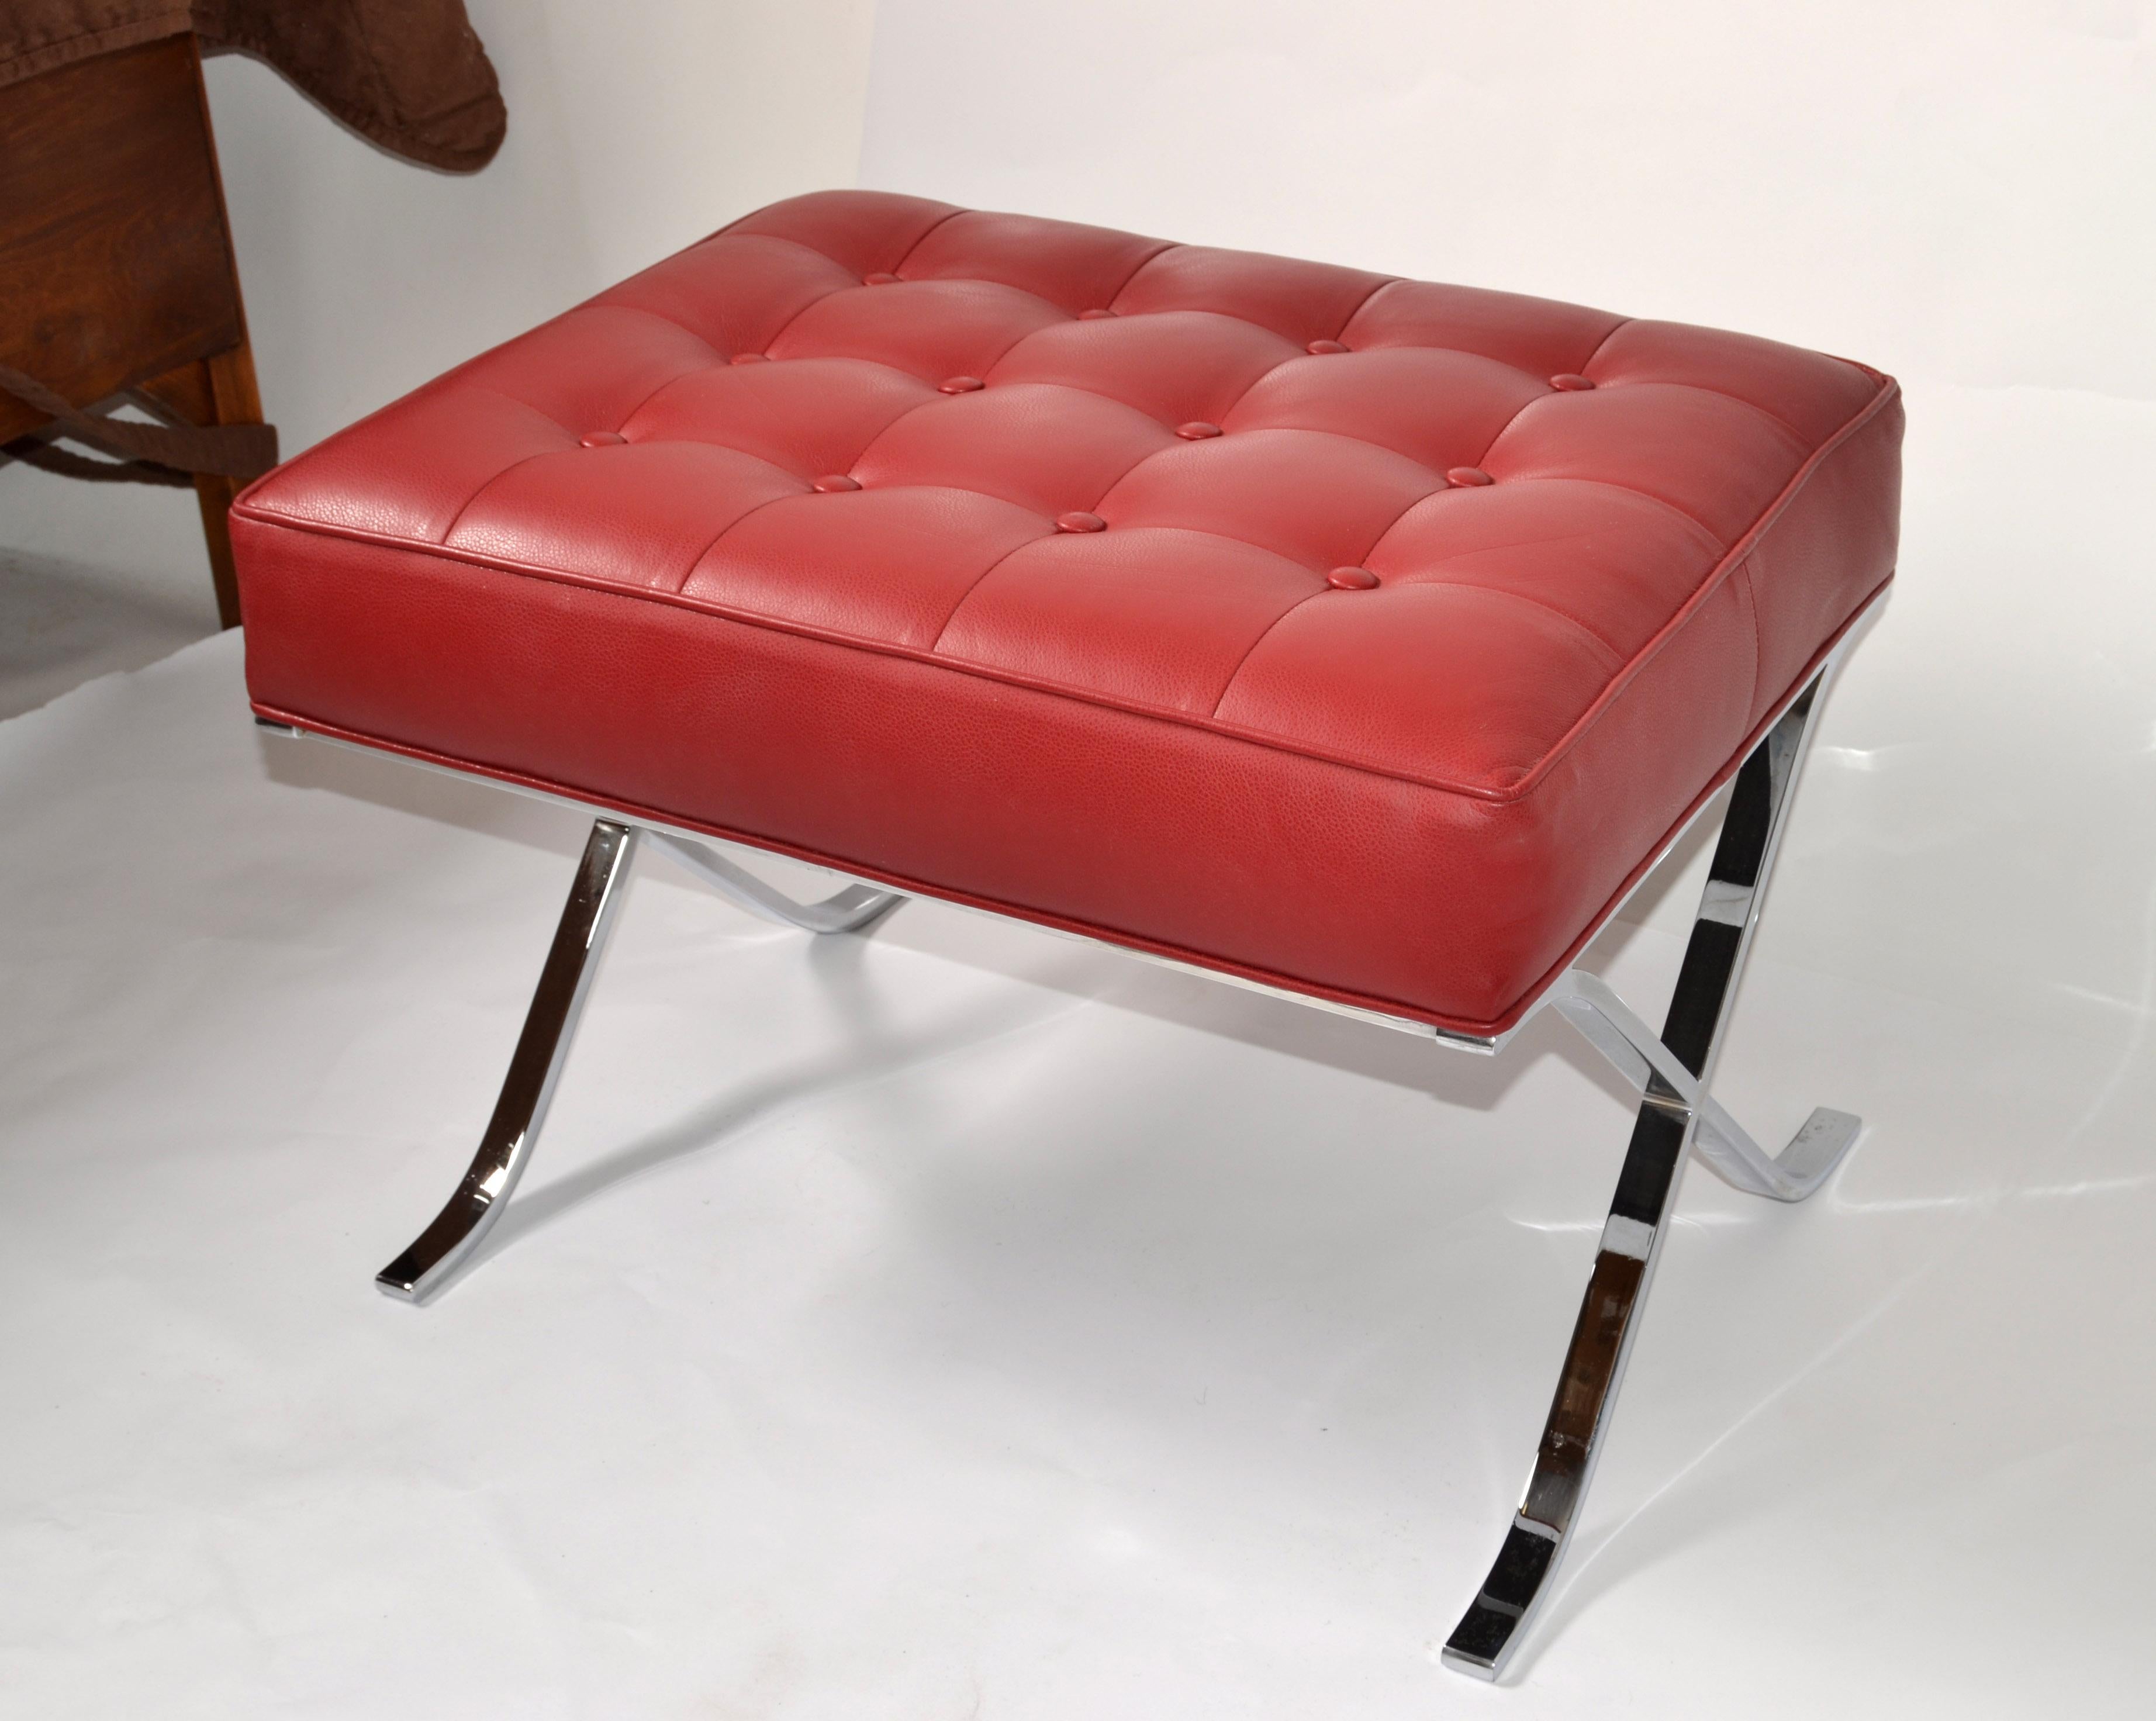 Mies Van Der Rohe Style Barcelona Chromed Steel Red Vinyl Ottoman Footstool 1980 For Sale 2